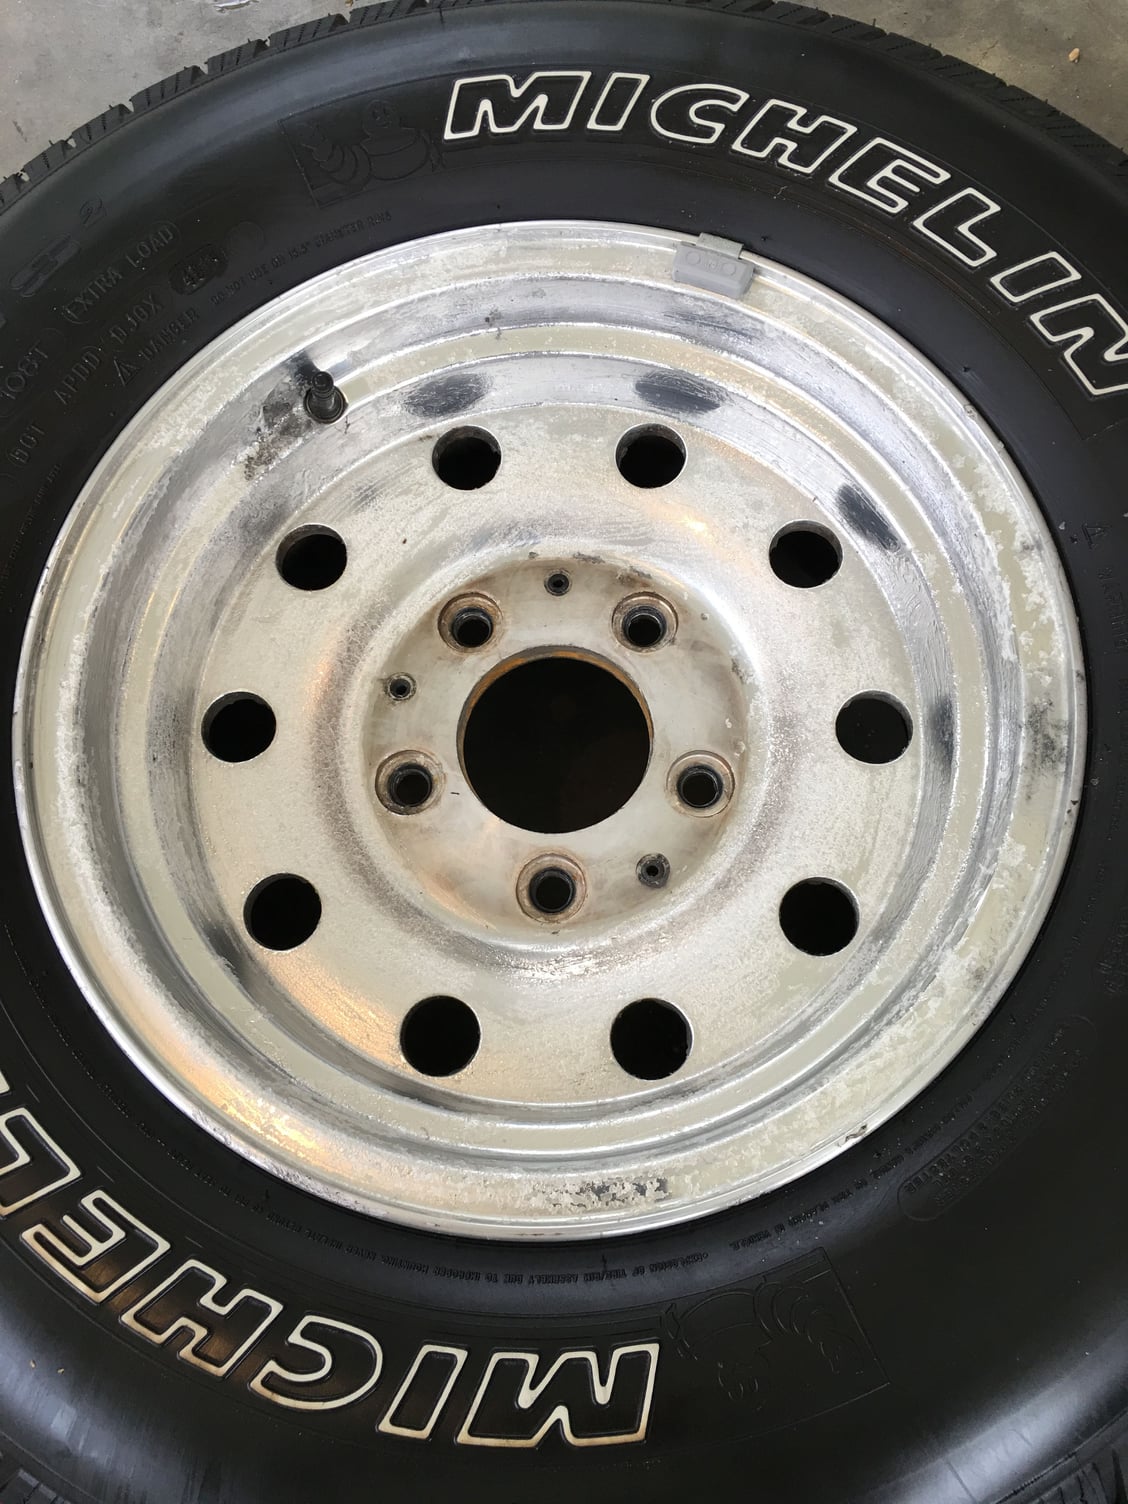 Refinishing bullet hole rims - Ford Truck Enthusiasts Forums